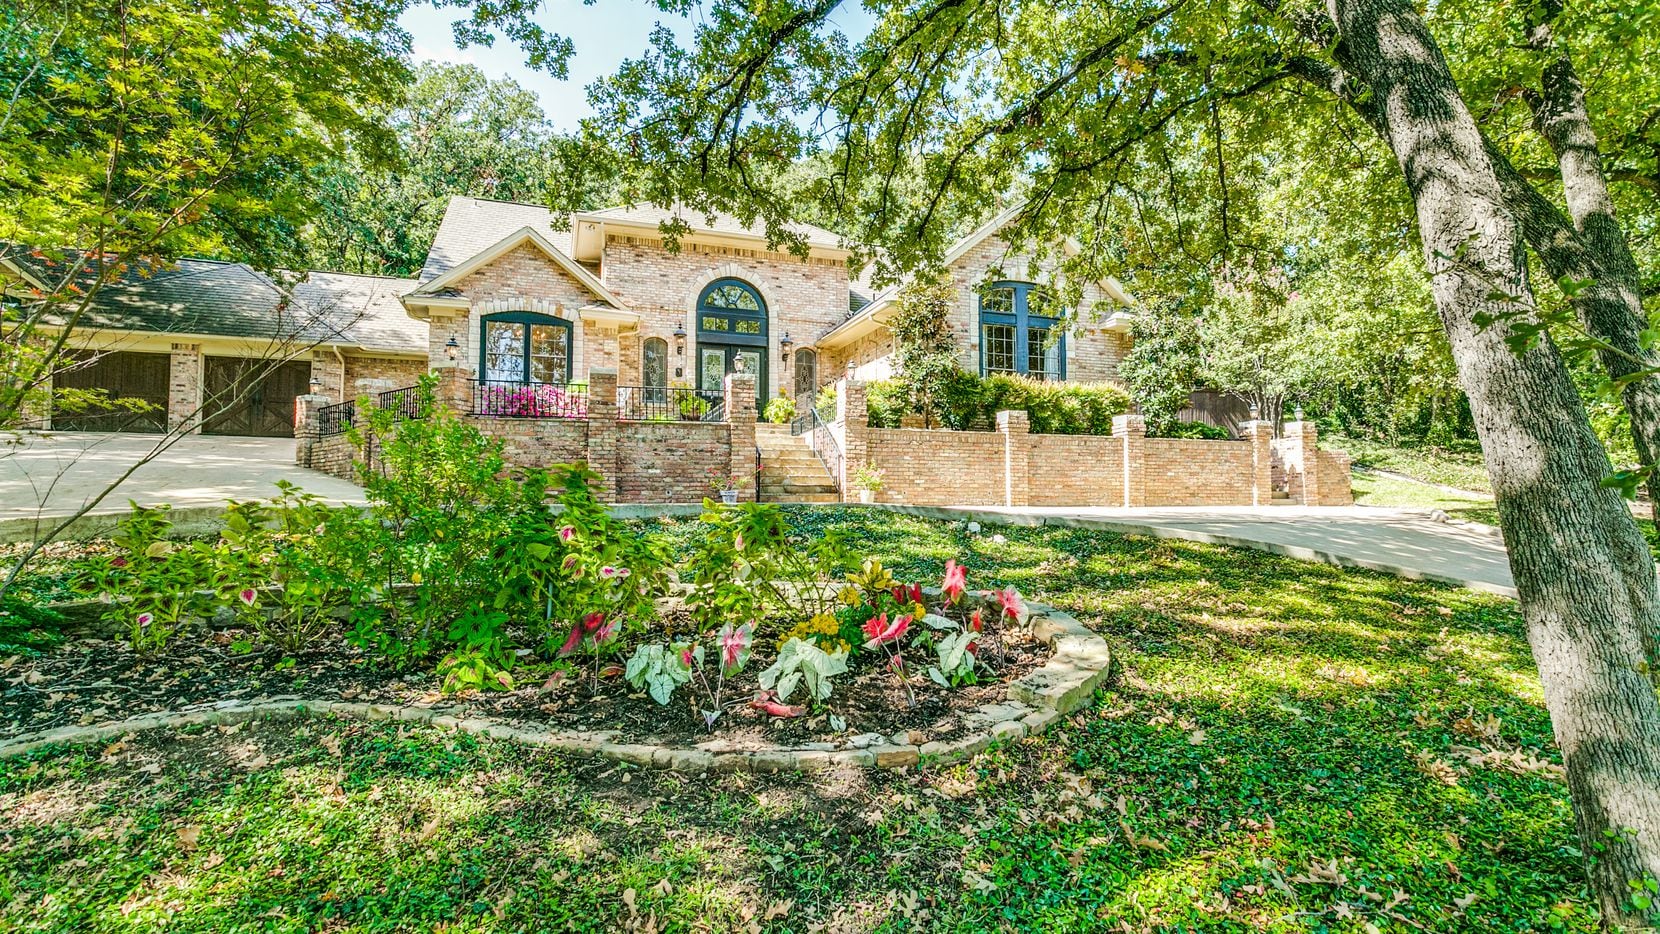 A look at the home at 3031 Parr Lane in Grapevine, TX.